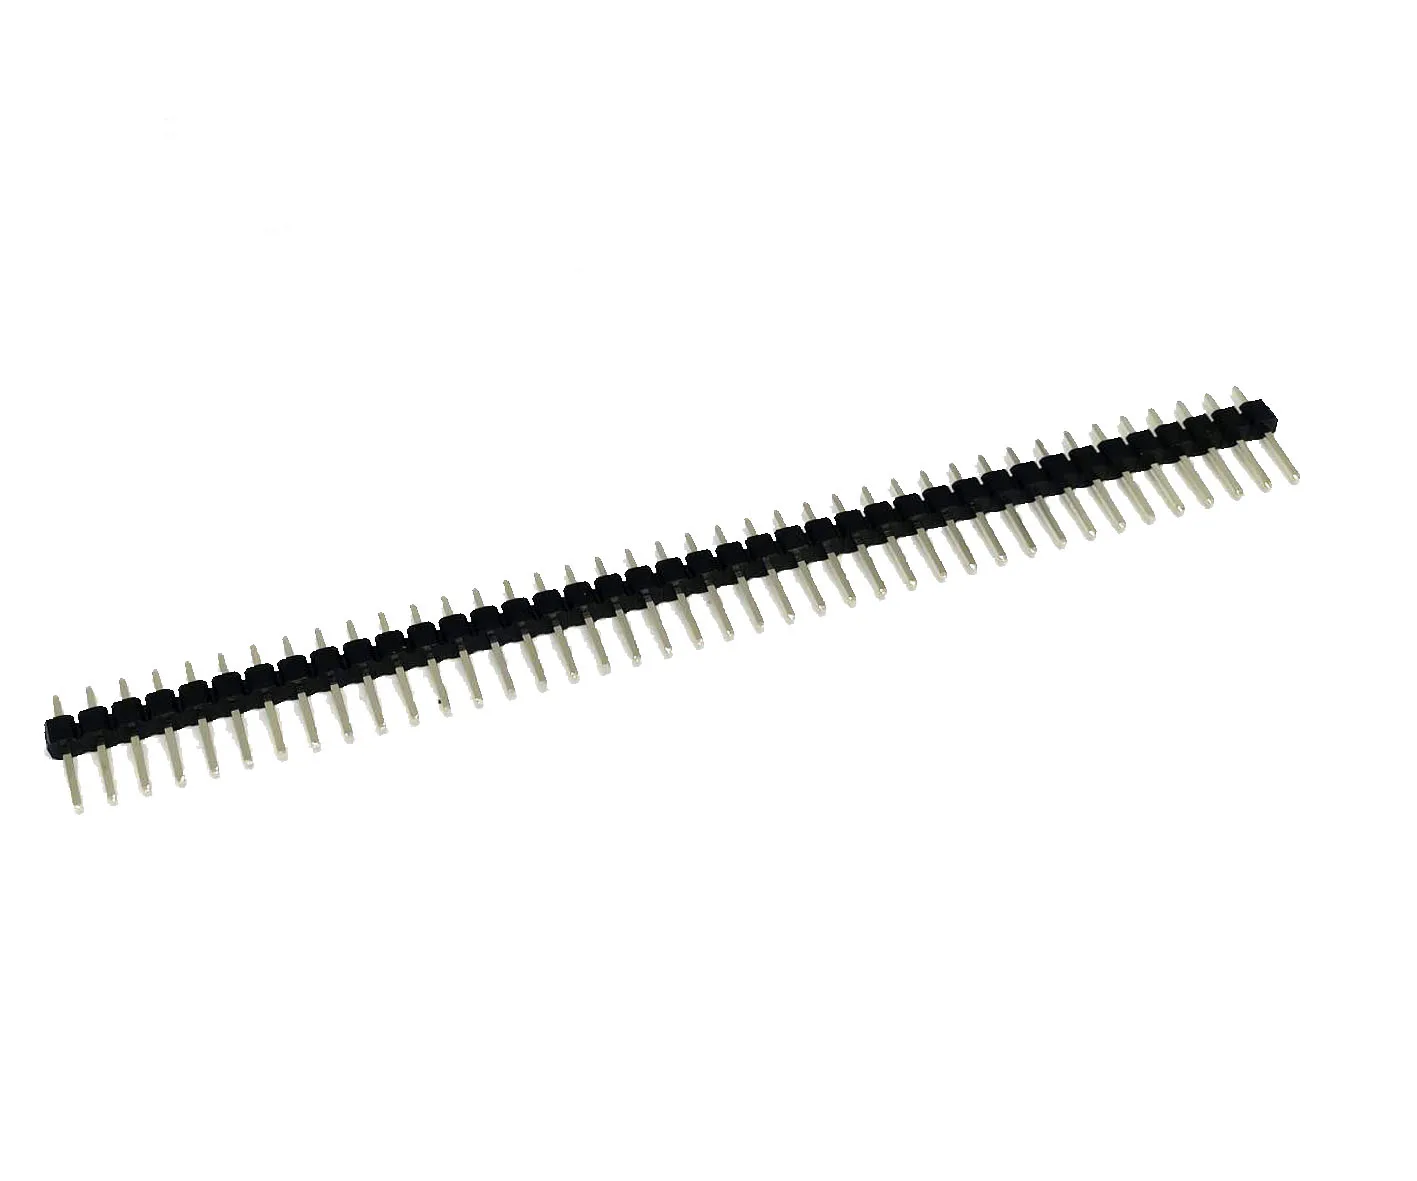 Press Fit male header 2.54mm straight type Pin Header (60484261893)